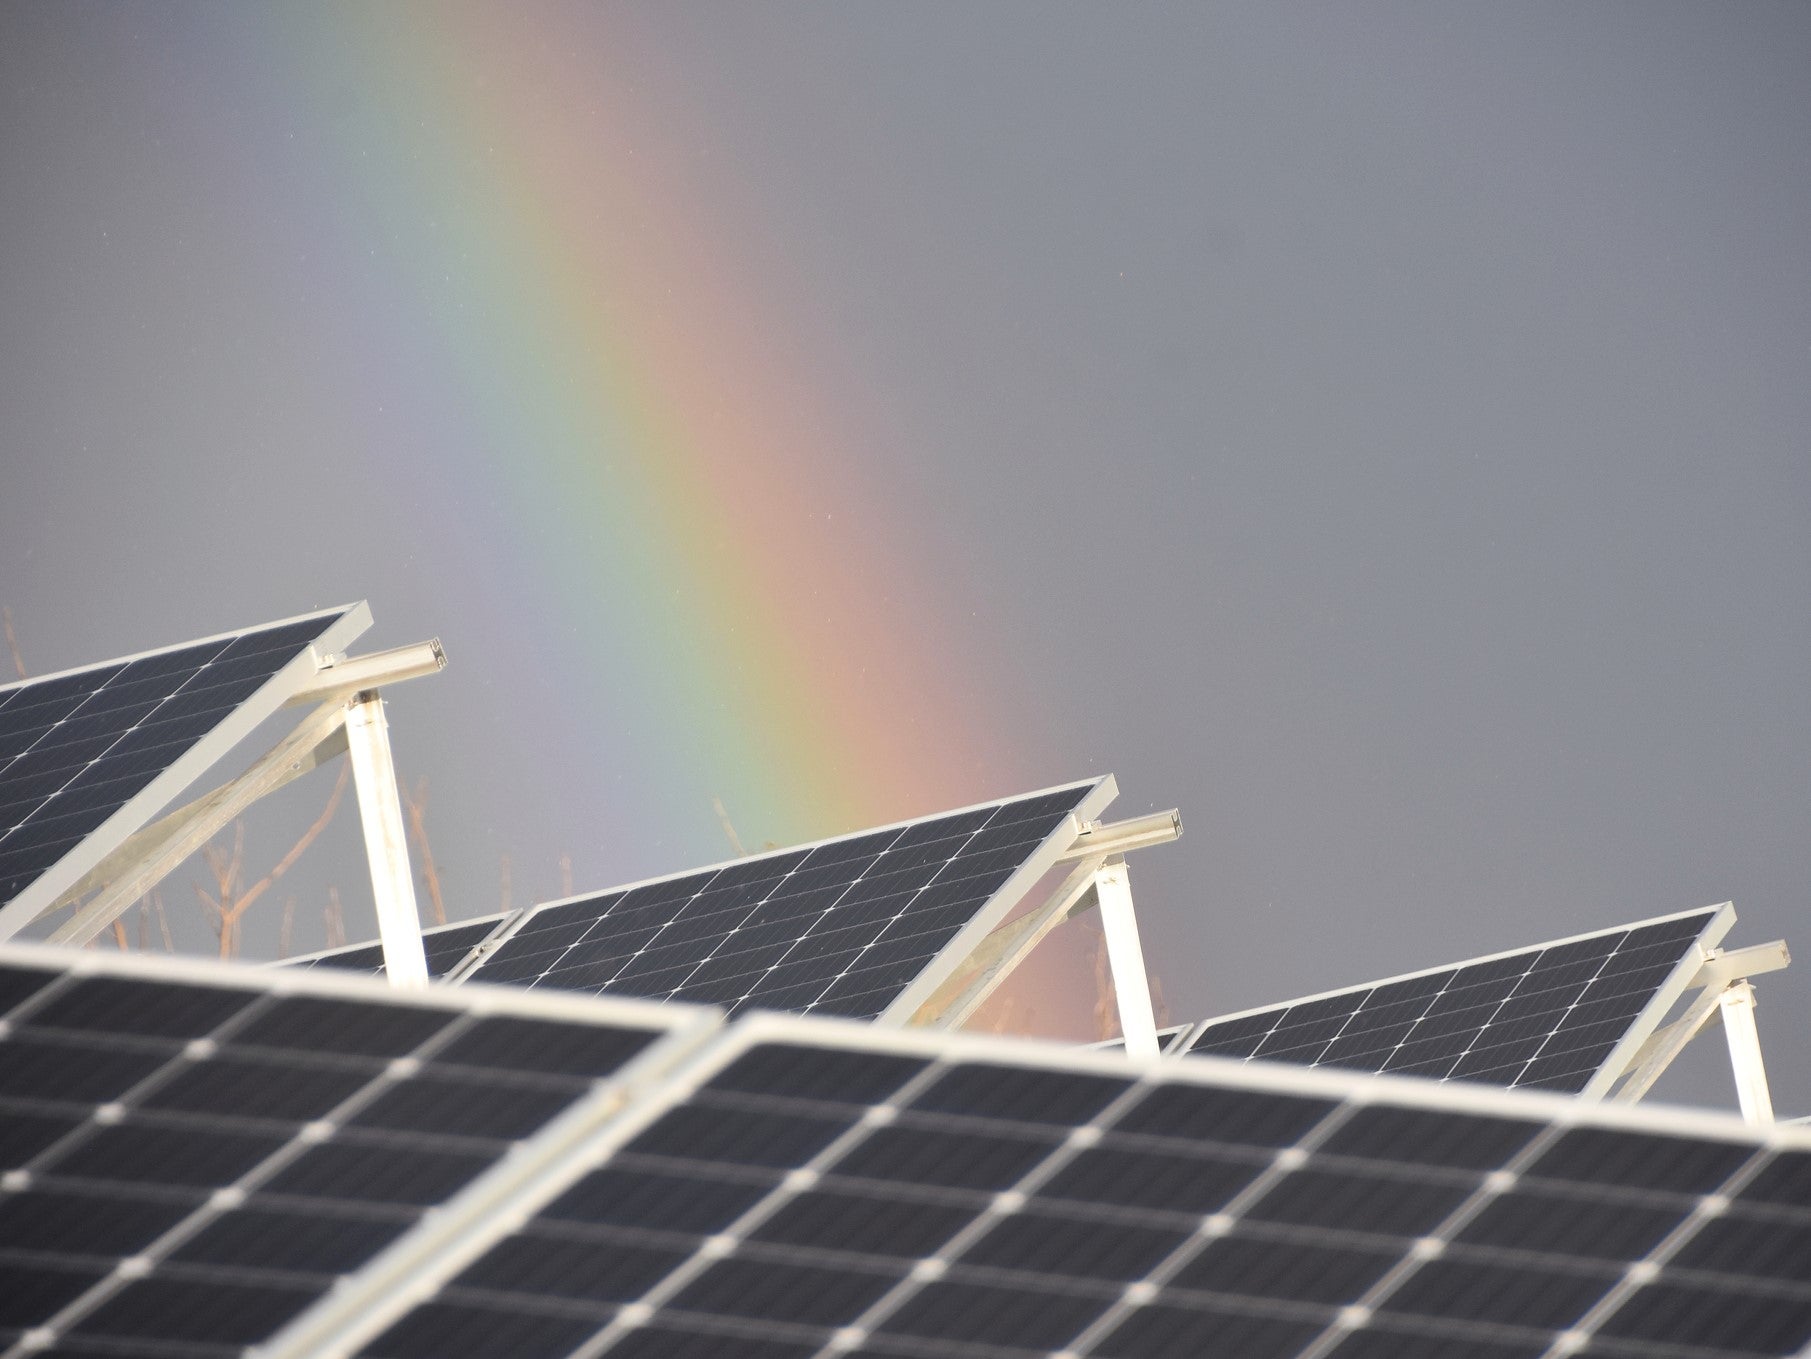 The mineral perovskite has been hailed for its potential to transform the solar power industry